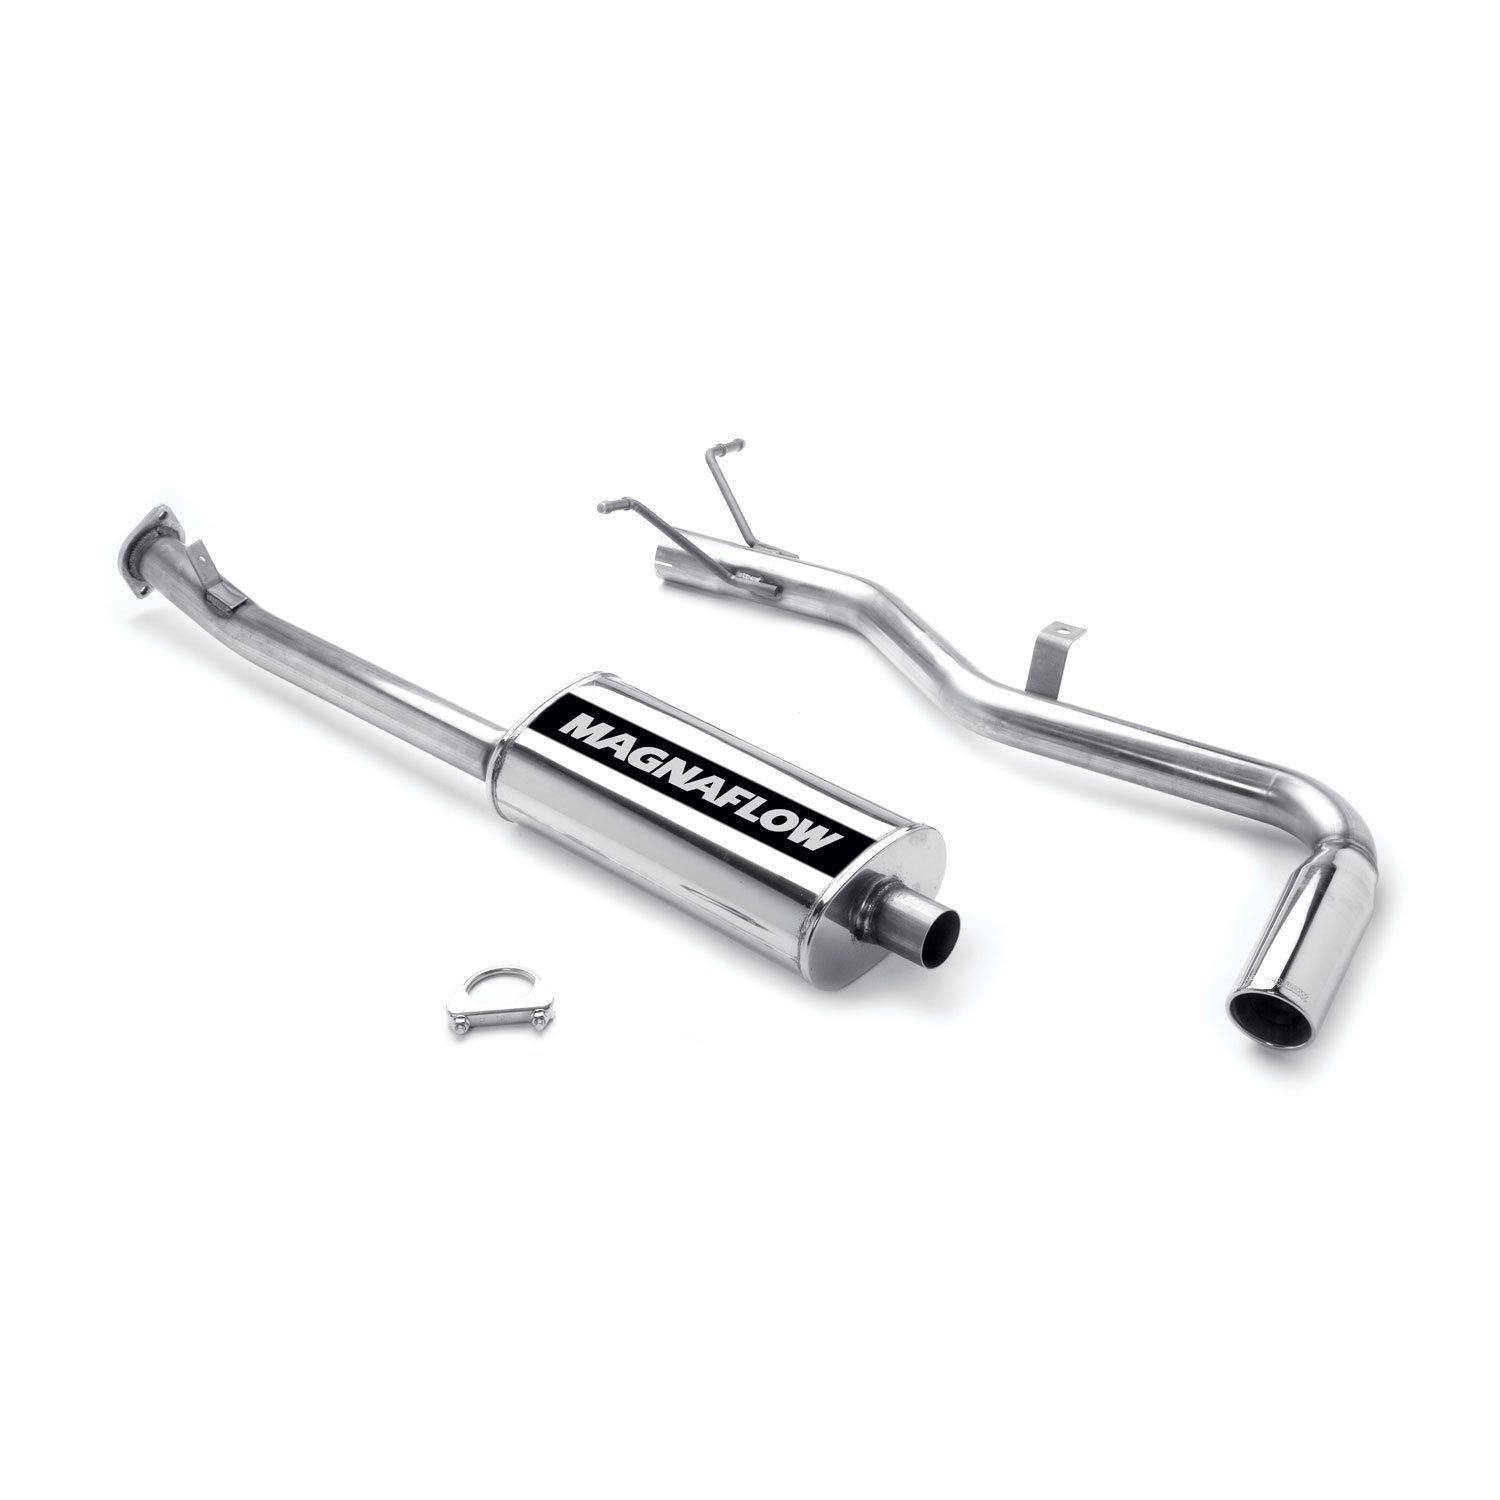 MF Series Cat-Back Exhaust System 2002-2004 Frontier 3.3L (Extended Cab, Long Bed)